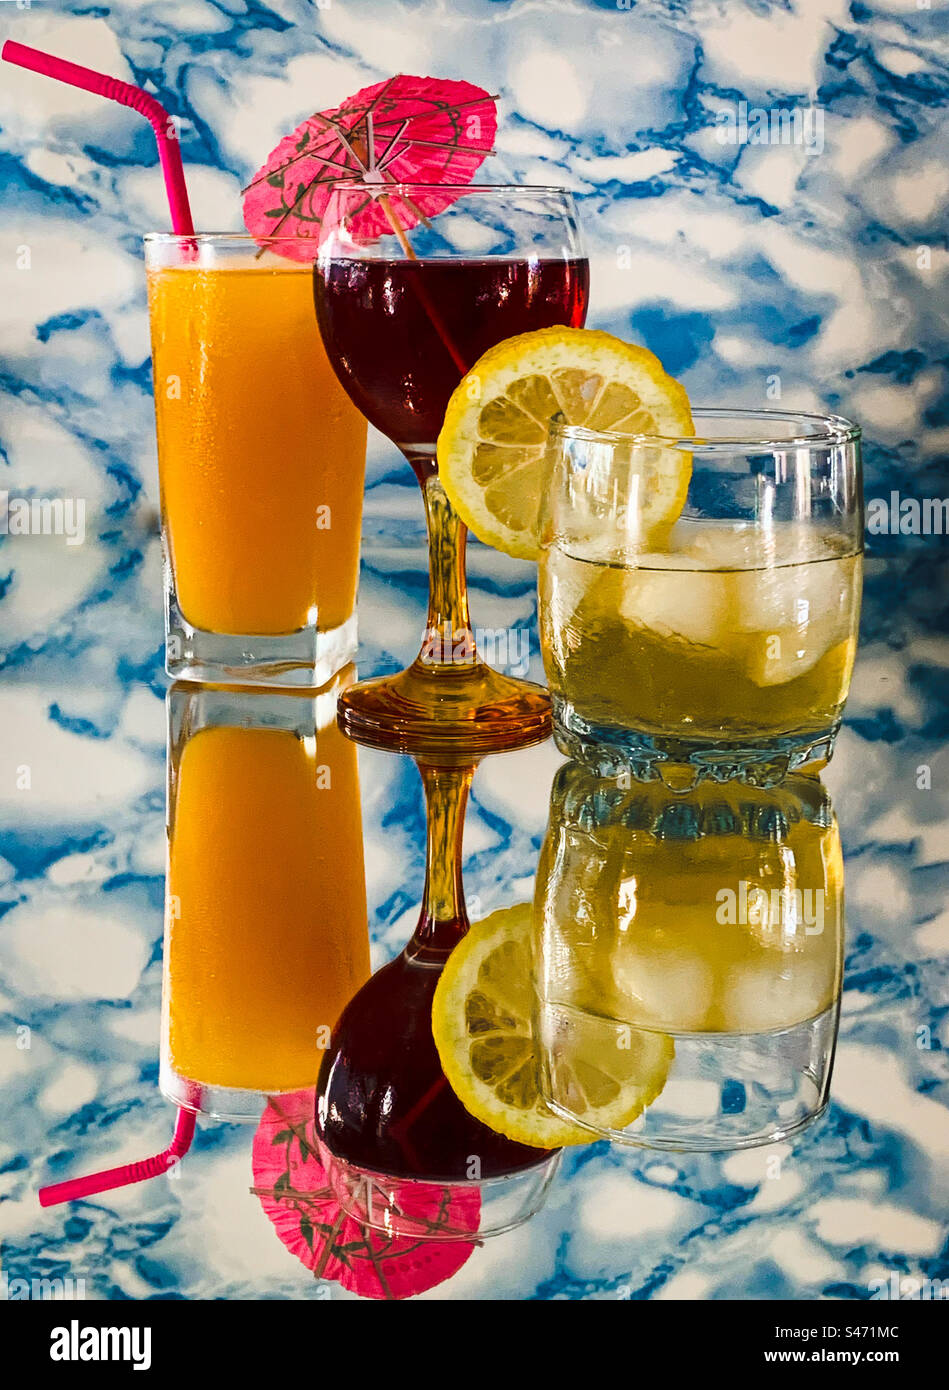 A selection of alcoholic drinks on a reflective surface Stock Photo